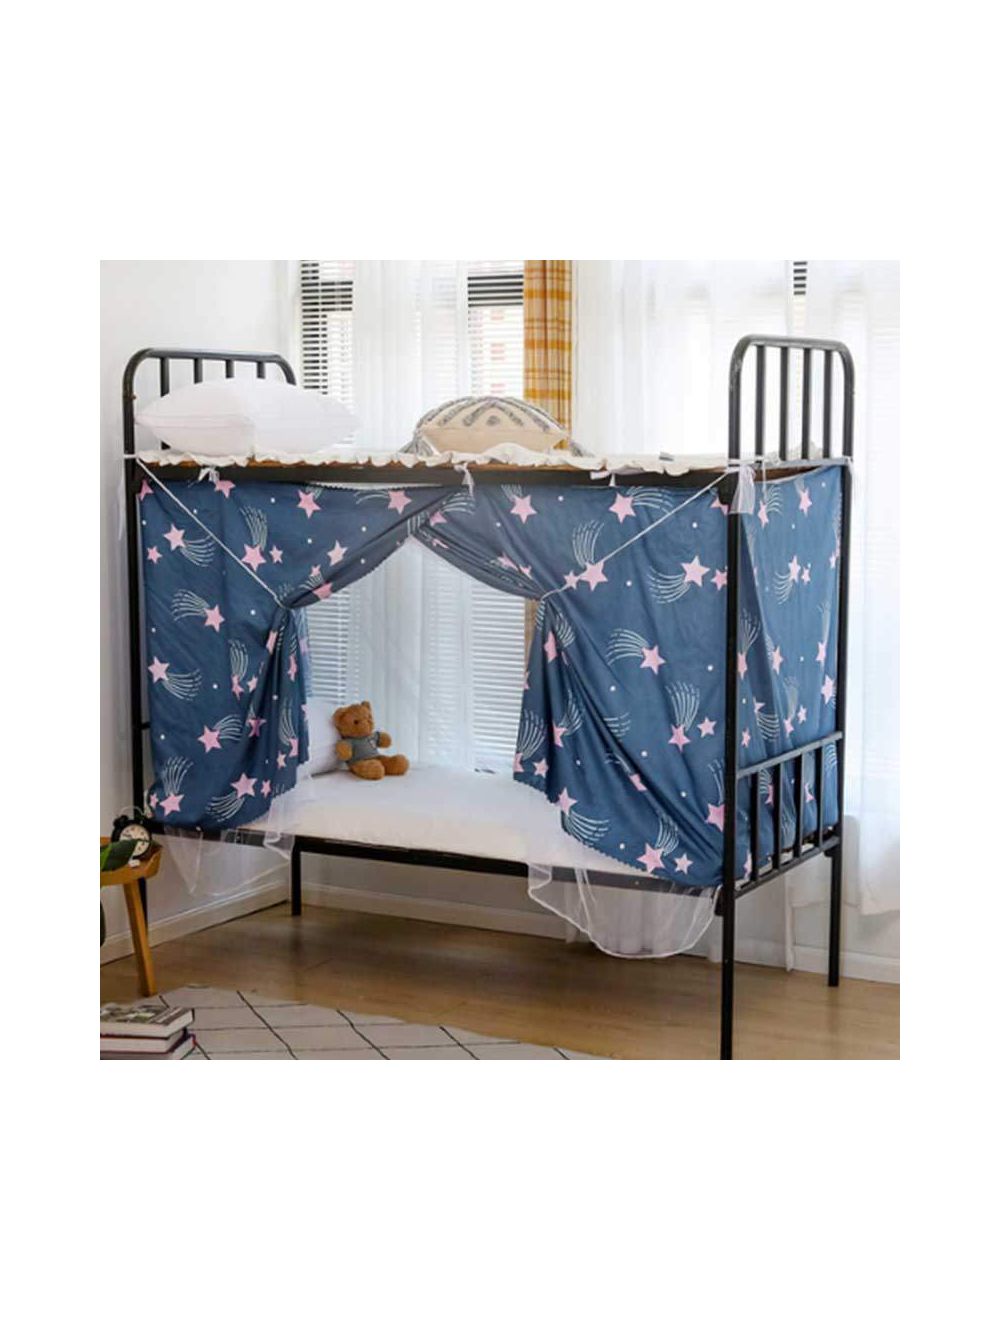 Deals for Less -Bed curtain for lower deck single bed, Star design denim blue color-BC43-03